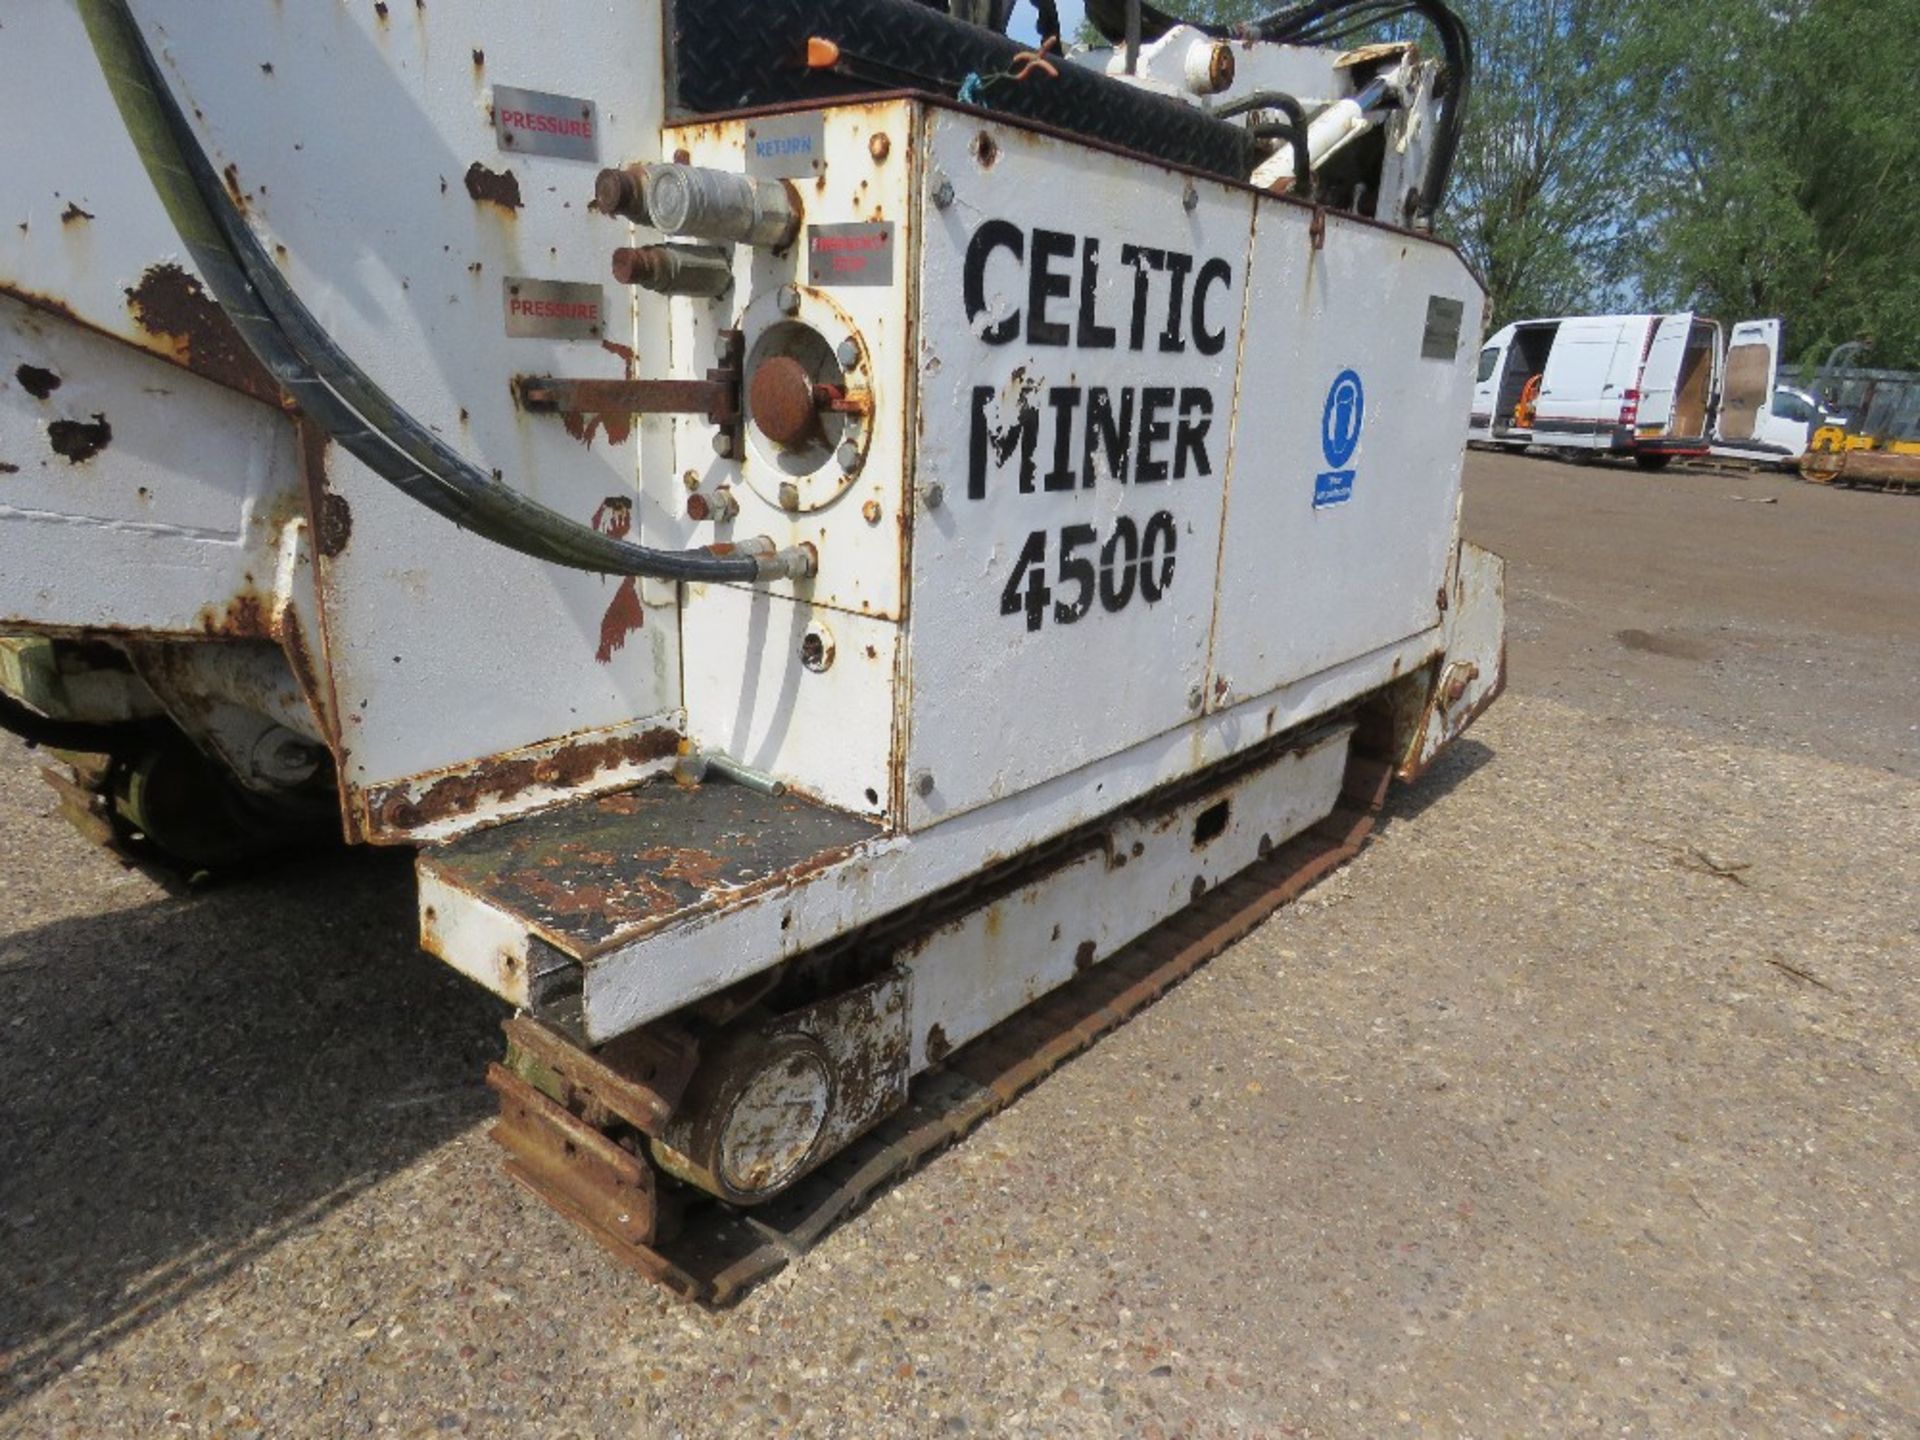 CELTIC MINOR 4500 MK1 ROADHEADER TUNNEL MINING EXCAVATOR MACHINE MANUFACTURED BY METAL INNOVATIONS L - Image 21 of 25